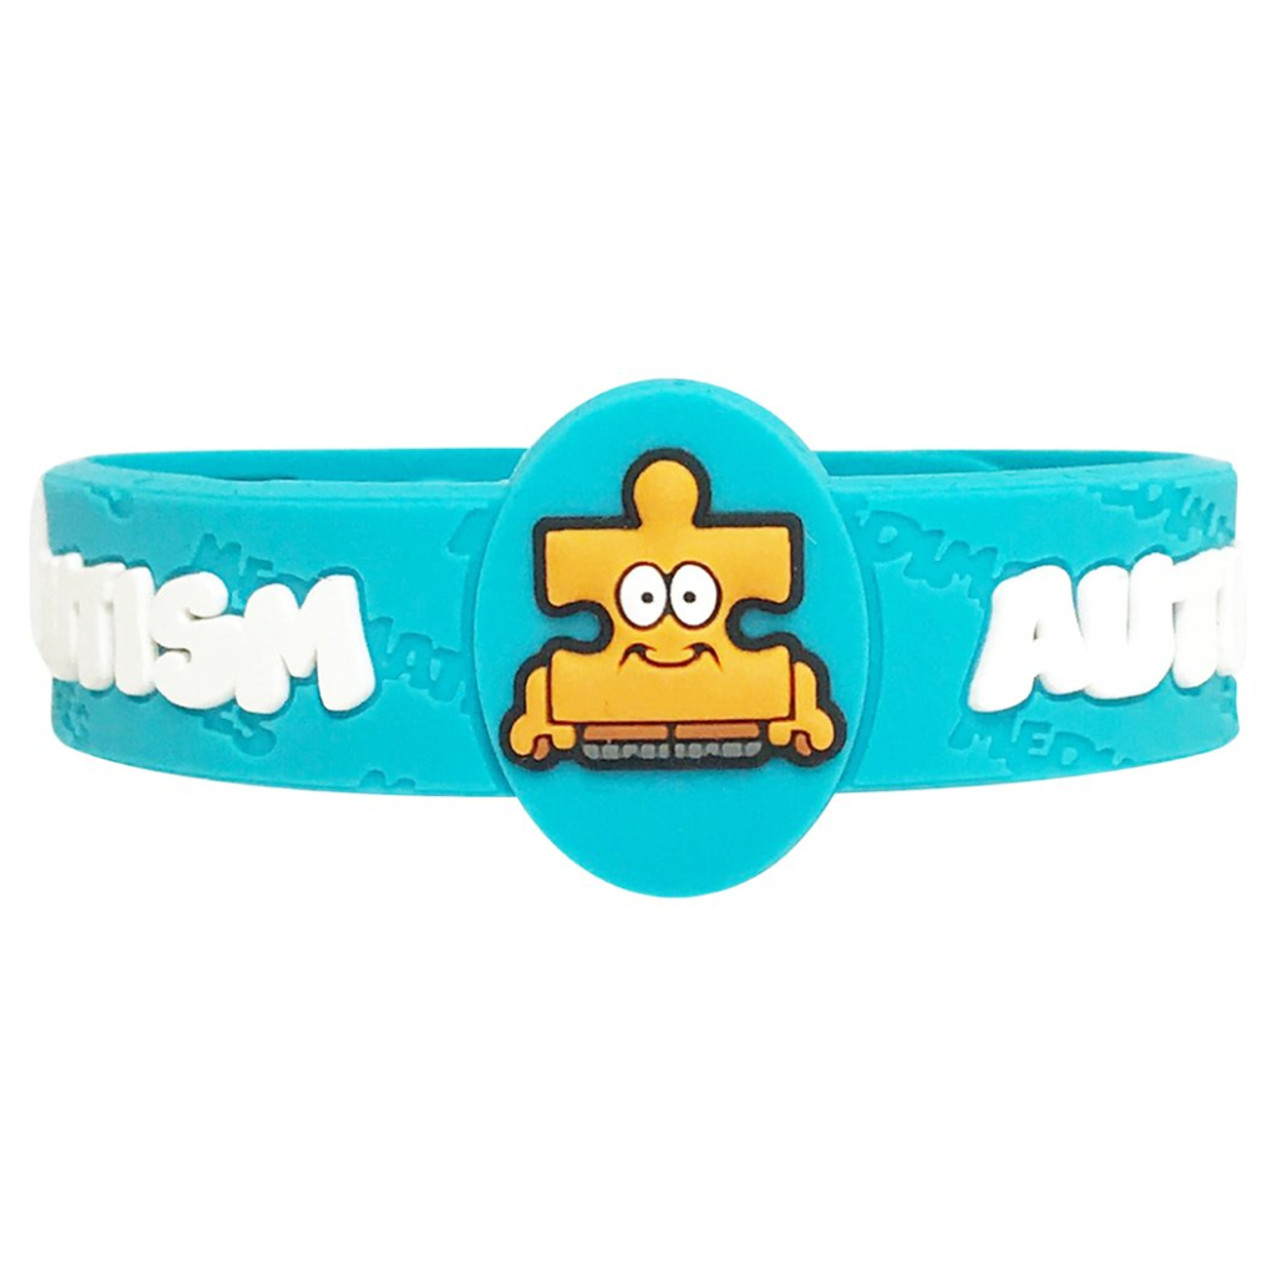 autism bracelet | Autism Alert Bracelet UK. Mans Ladys Autistic Awareness Identity  Medical ID Wristband. Alerts Paramedic Phone in Emergency. Waterproof  Updateable Not Engraved SMS Feature*